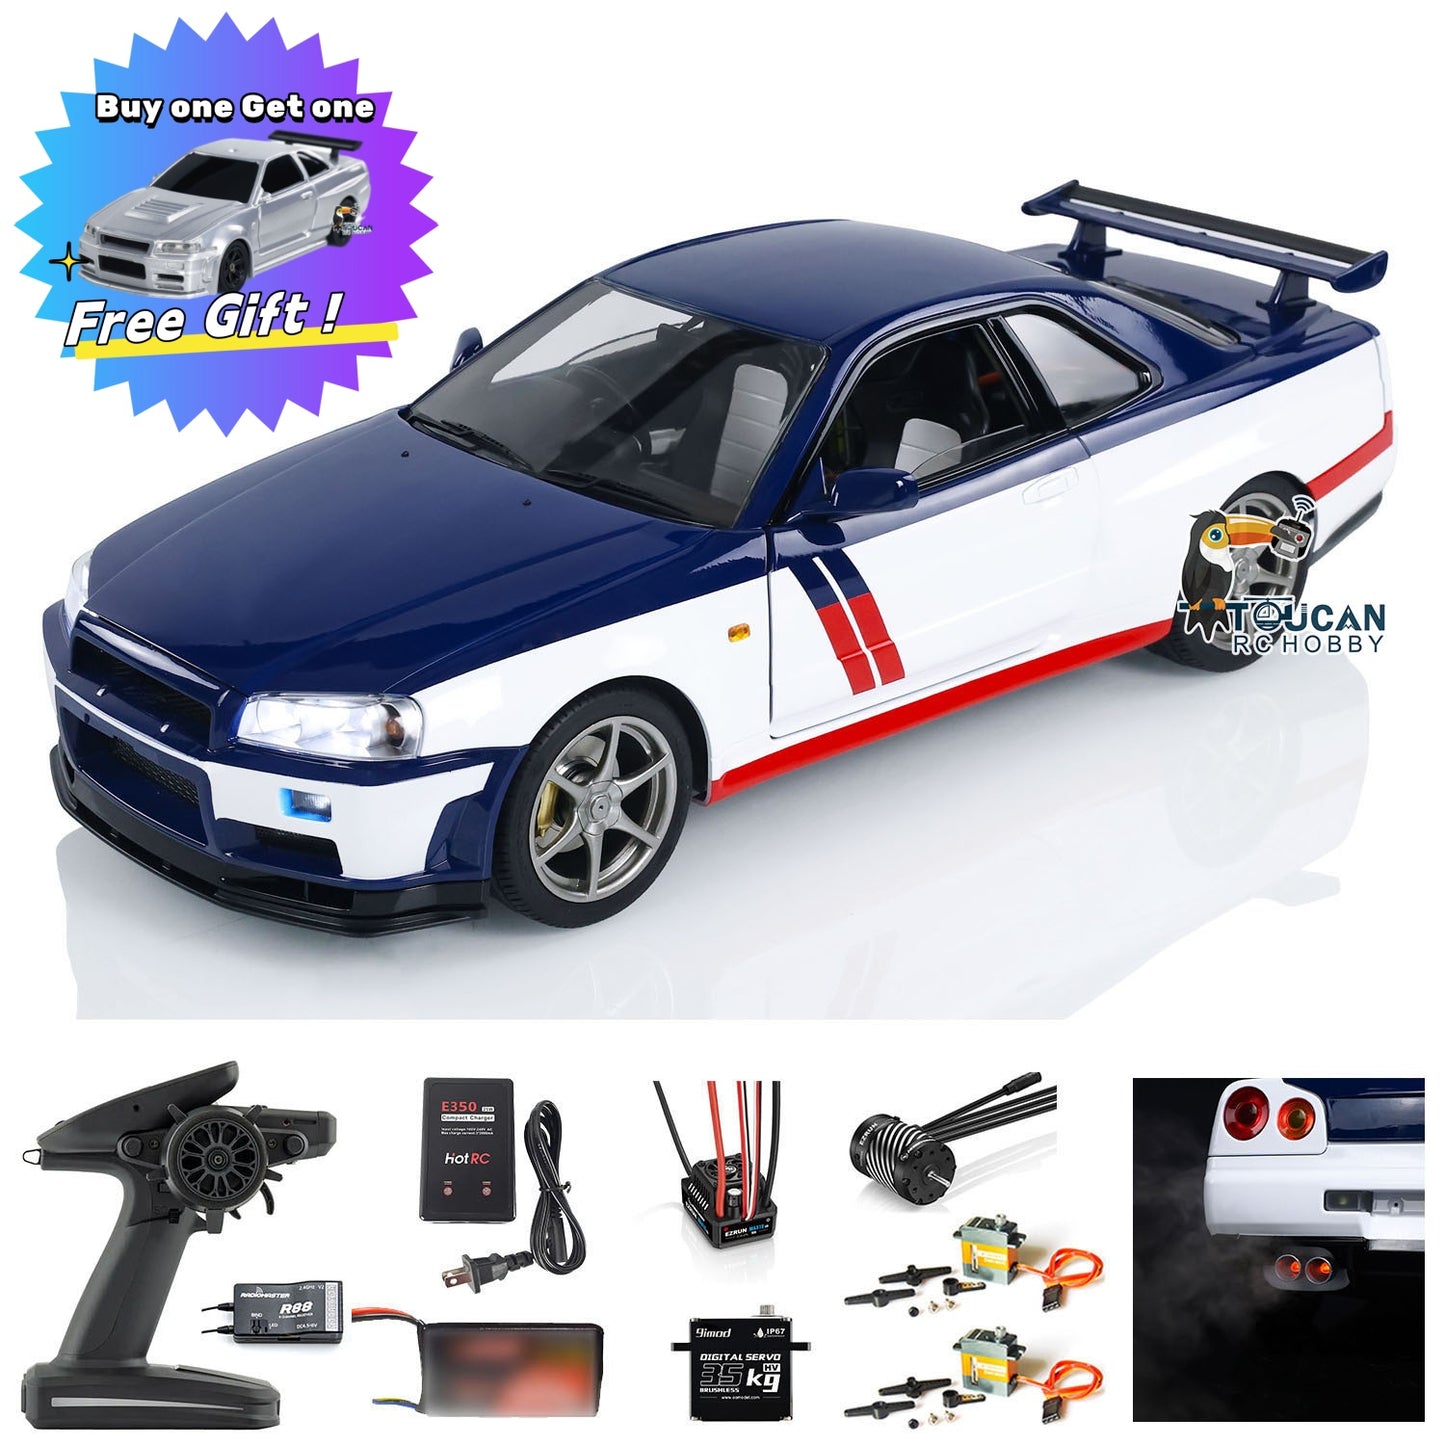 Capo R34 1/8 4WD 4x4 Metal RC Racing Car Remote Control Drift Cars High Speed RTR Ready to Run Sound Smoking Optional Versions